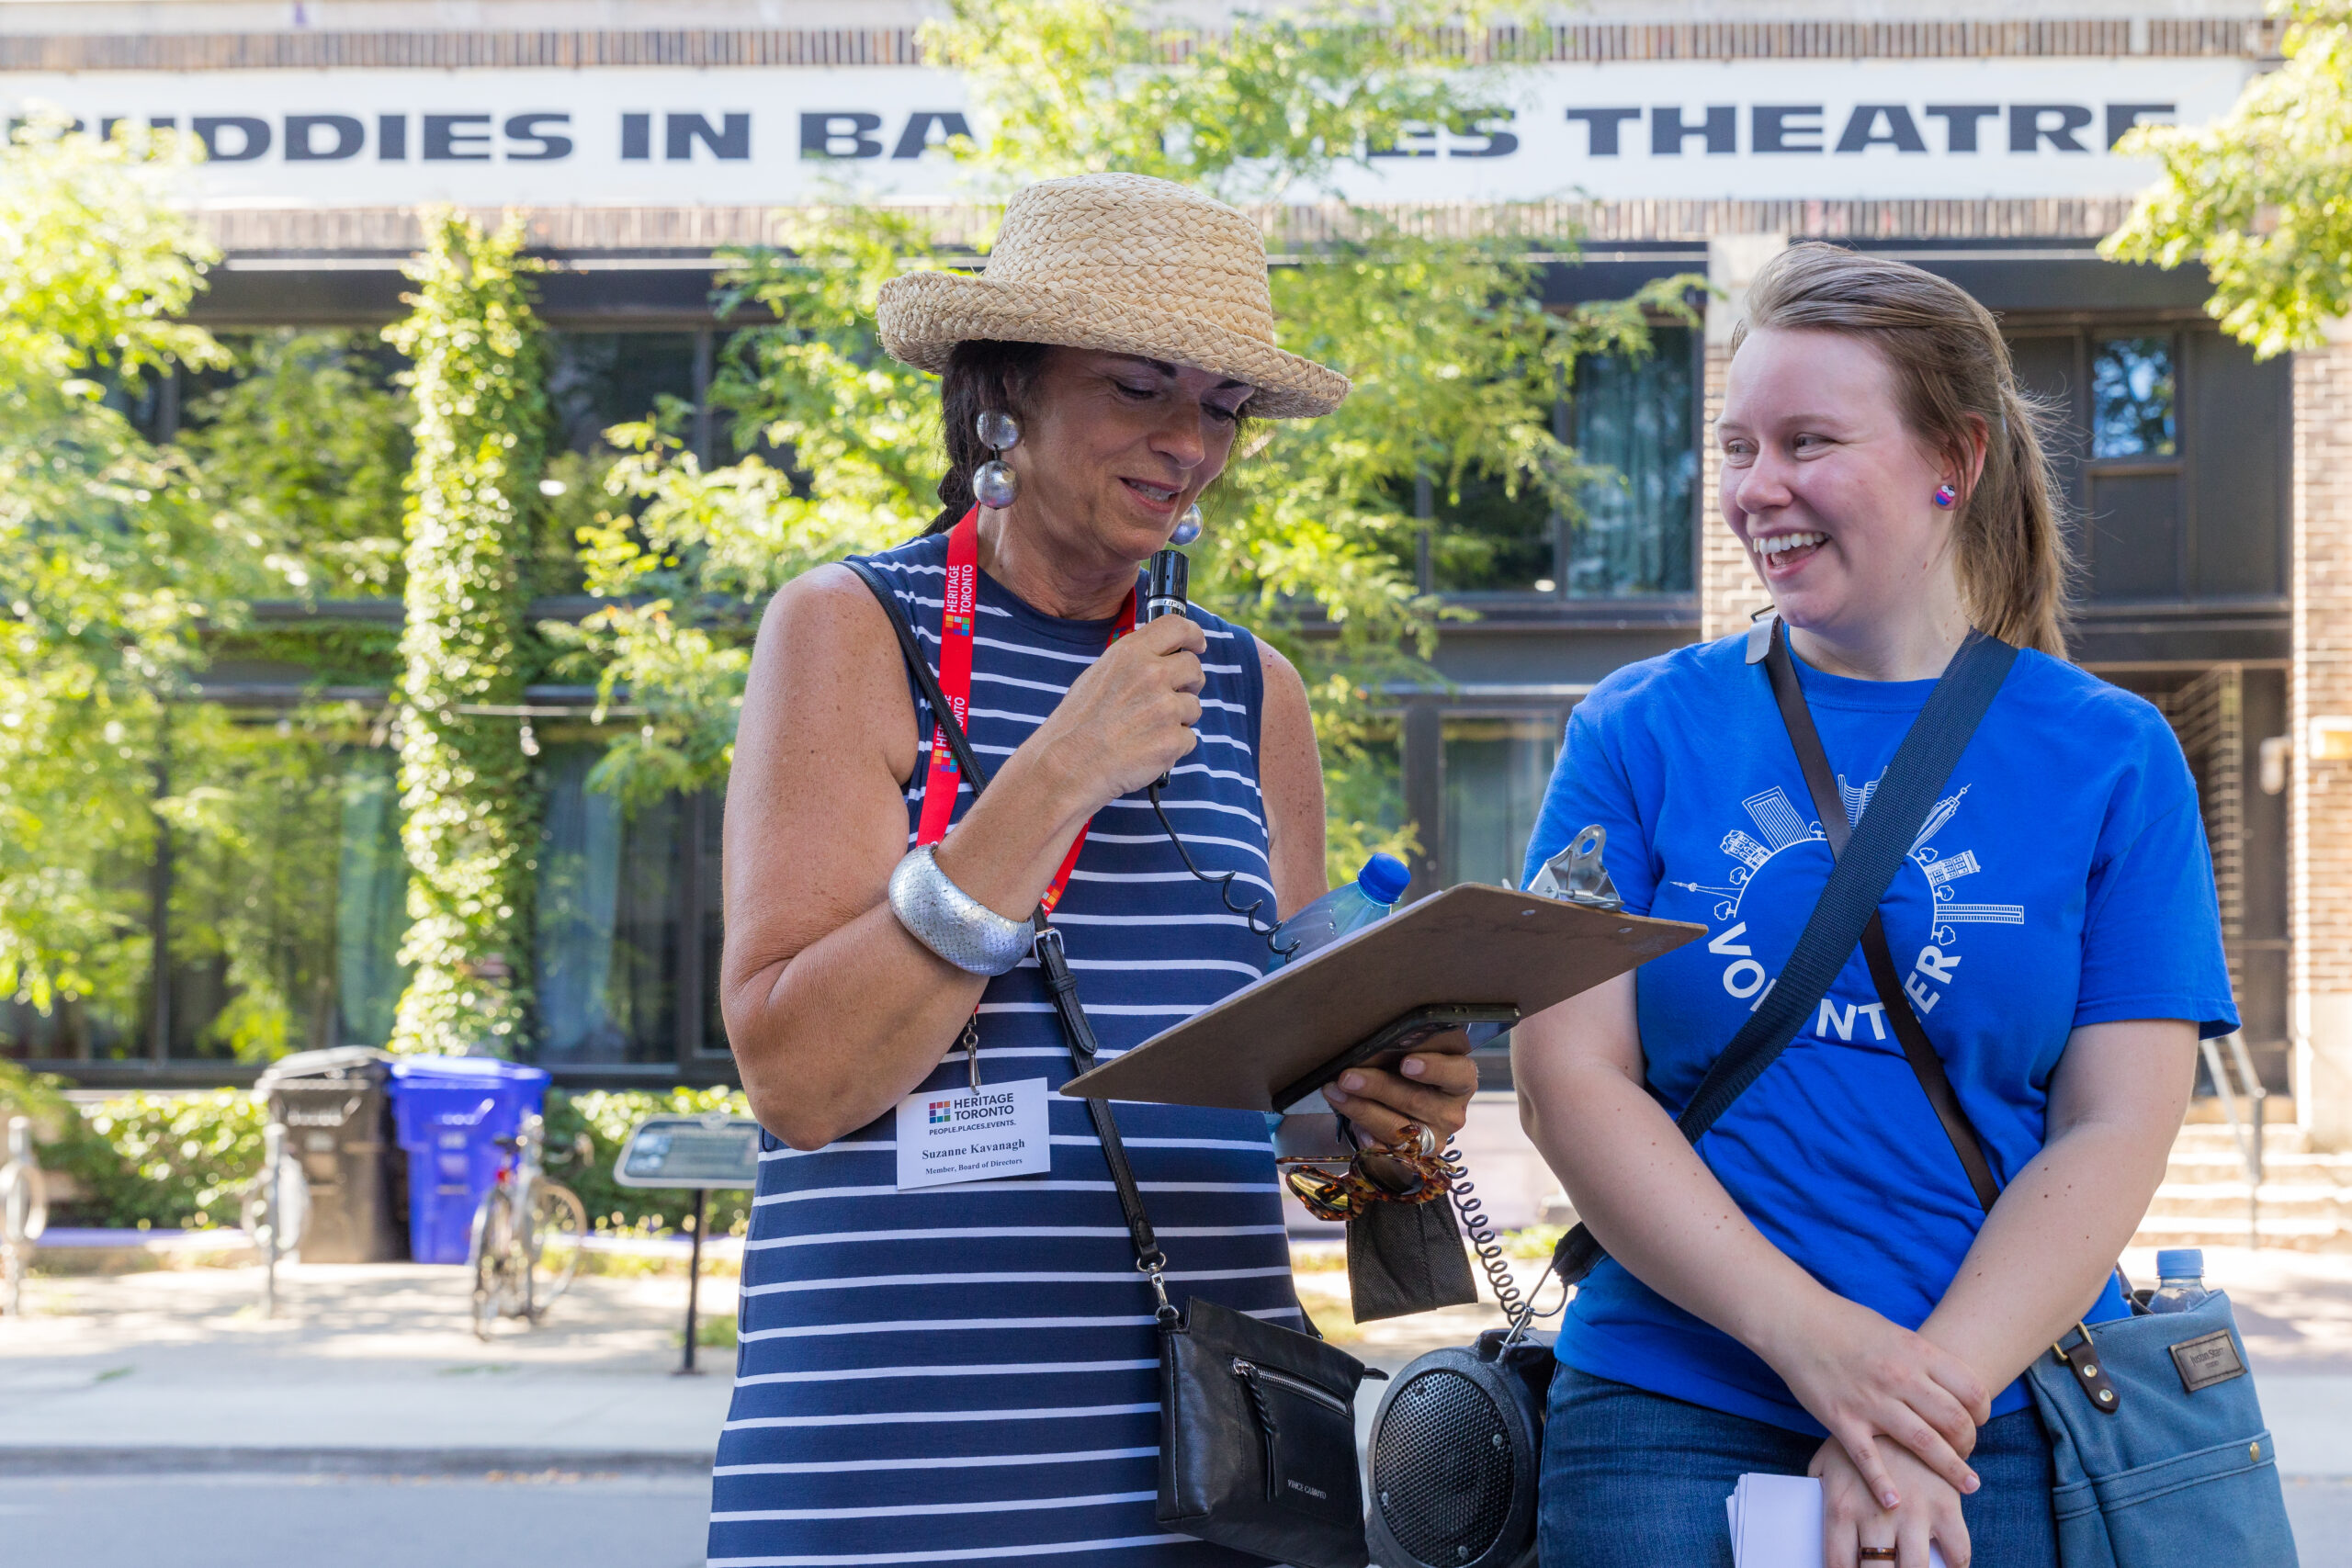 Two women stand beside each other. On the left, one holds a microphone and reads from a clipboard. On the right, one smiles at her companion.